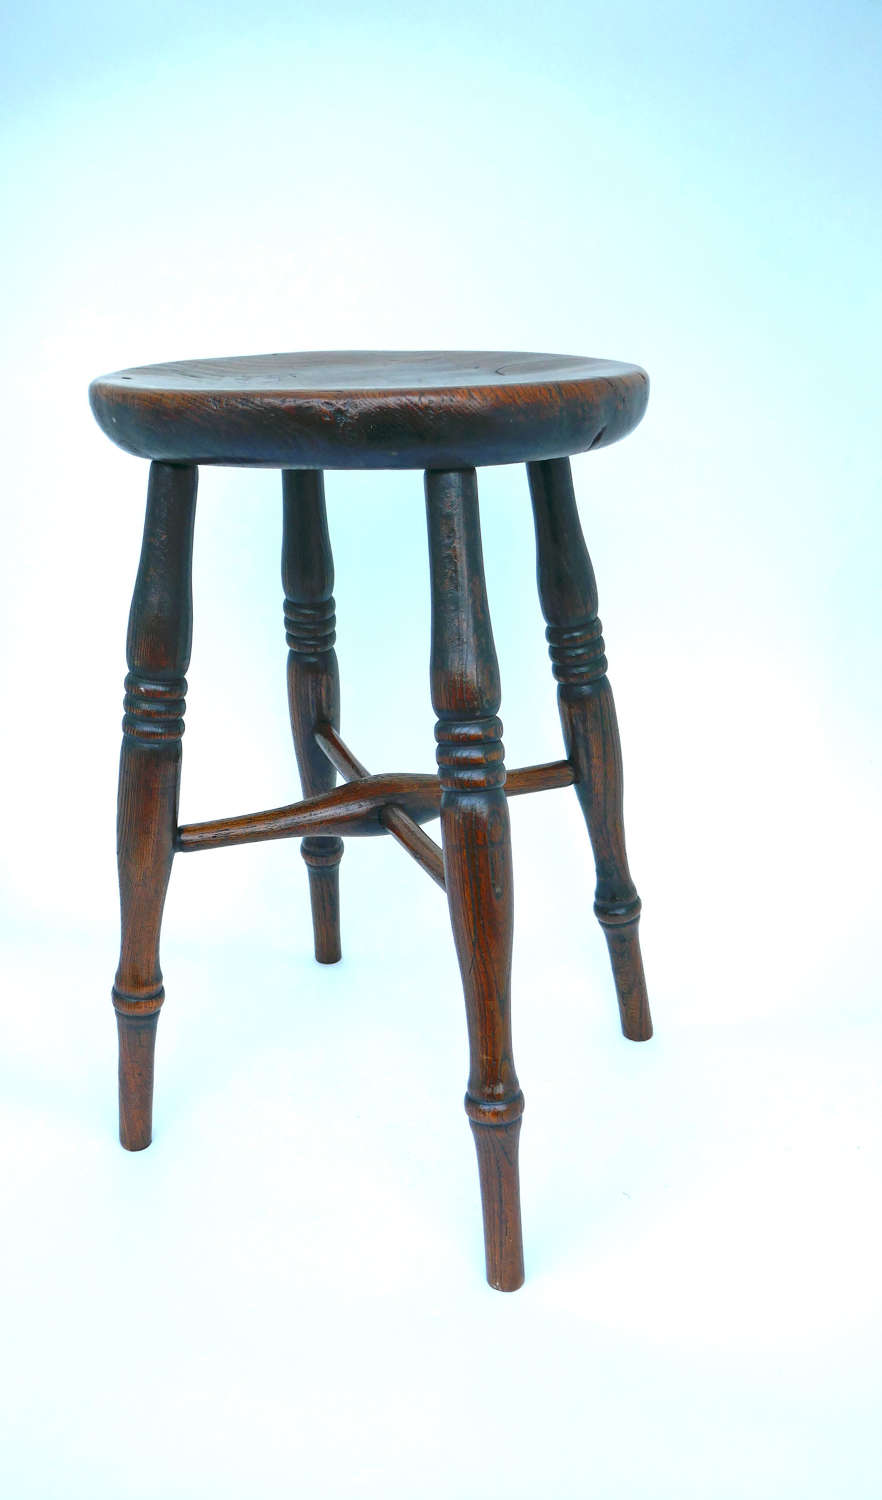 Antique Country Furniture 19thc Elm High Stool. English C1820-40.